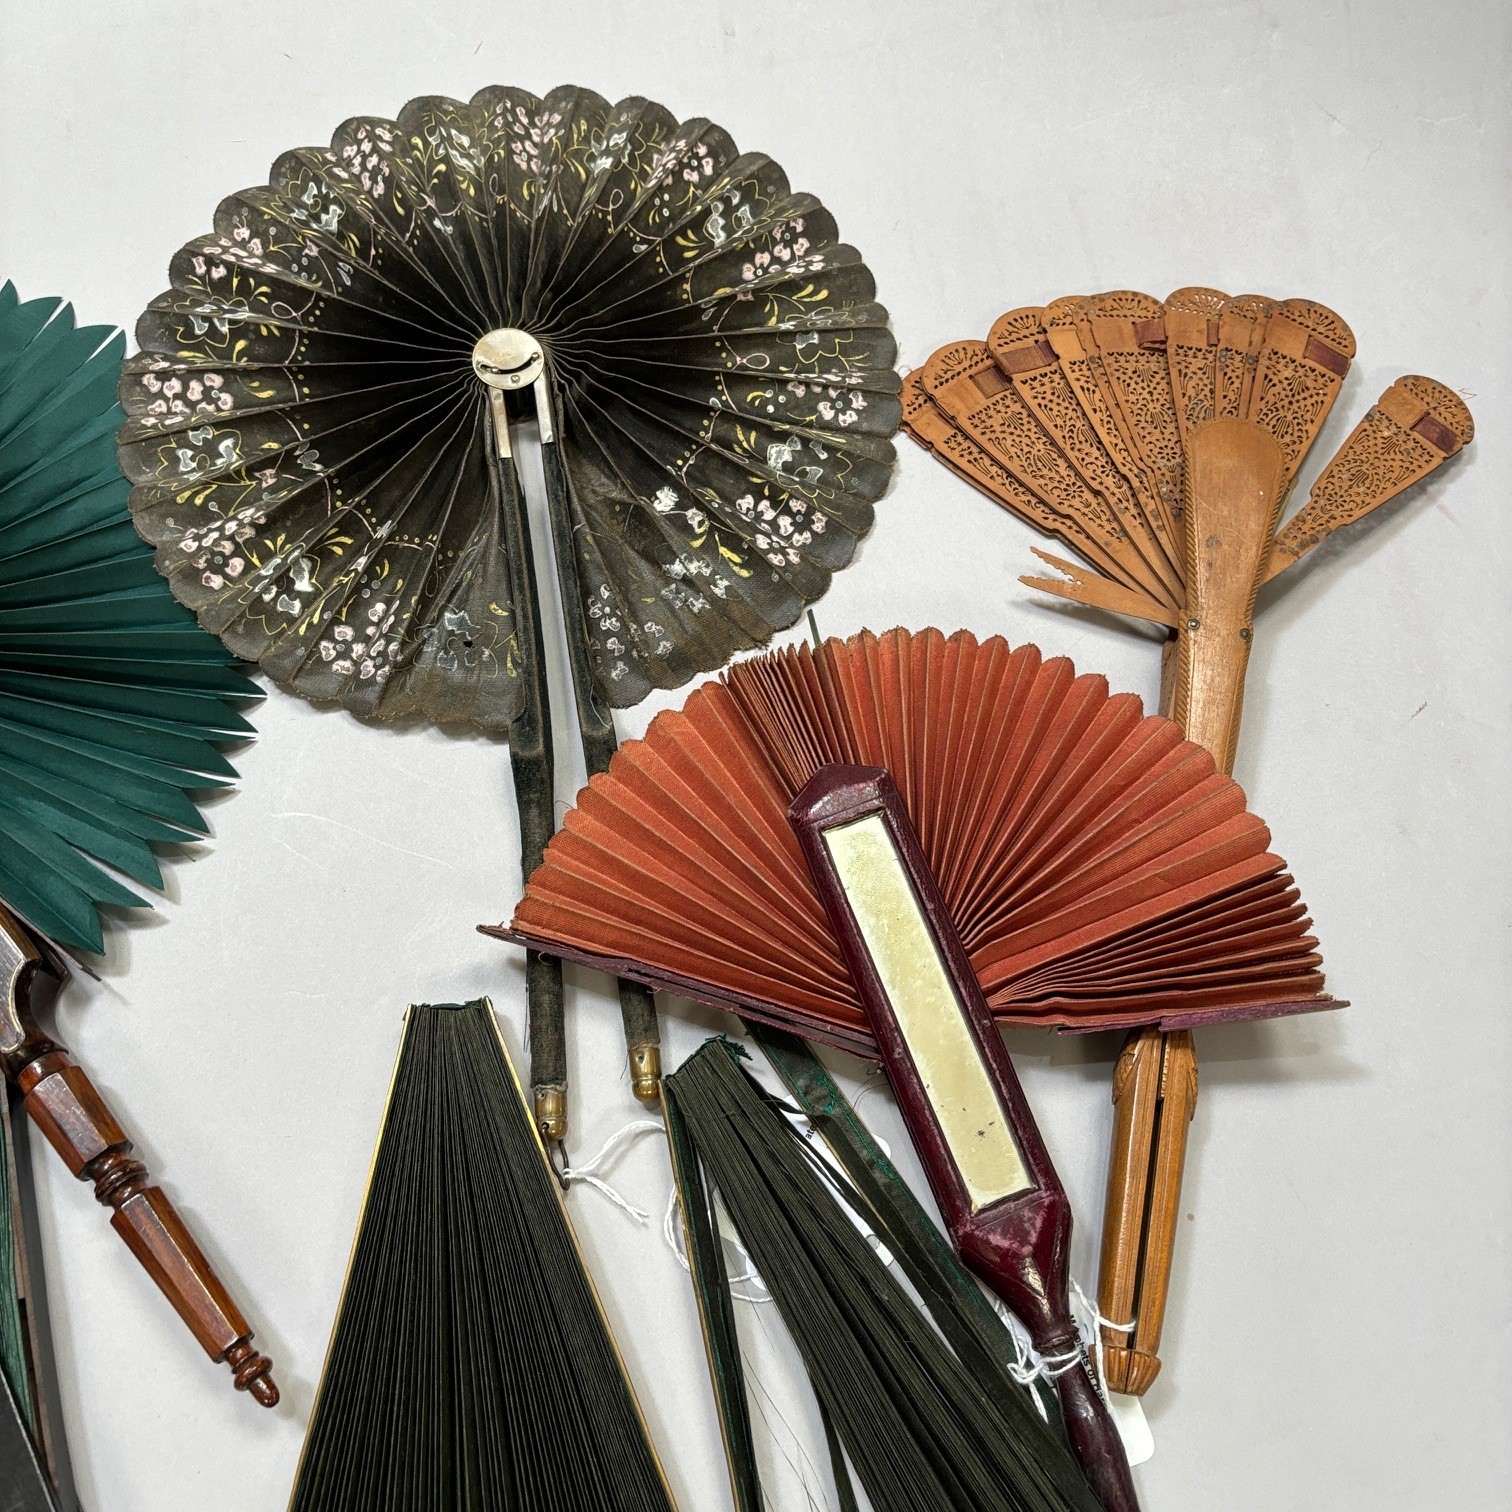 A fine French wood cockade fan, patented, see gold metal plate on the moveable shaft holding the - Image 3 of 3